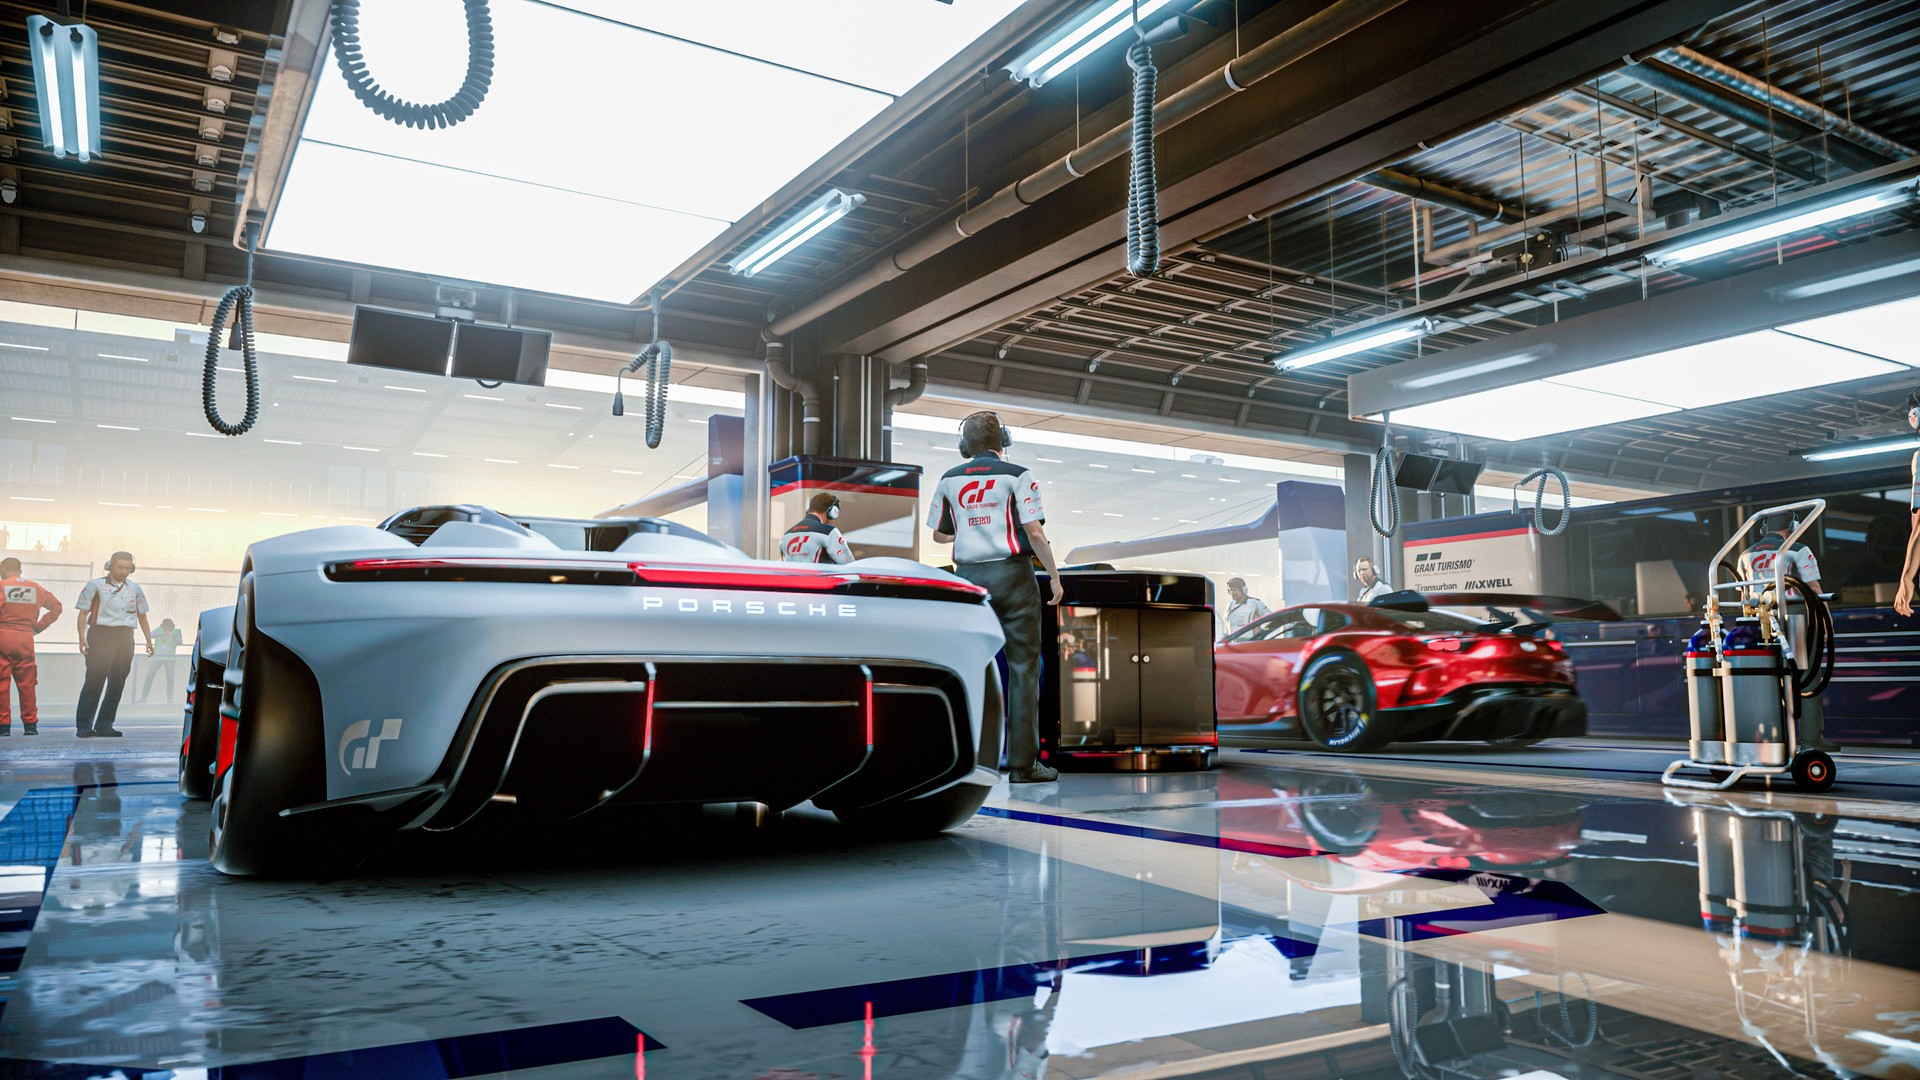 New Gran Turismo 7 PS5 Screenshots Reveal Preorder Cars In Jaw